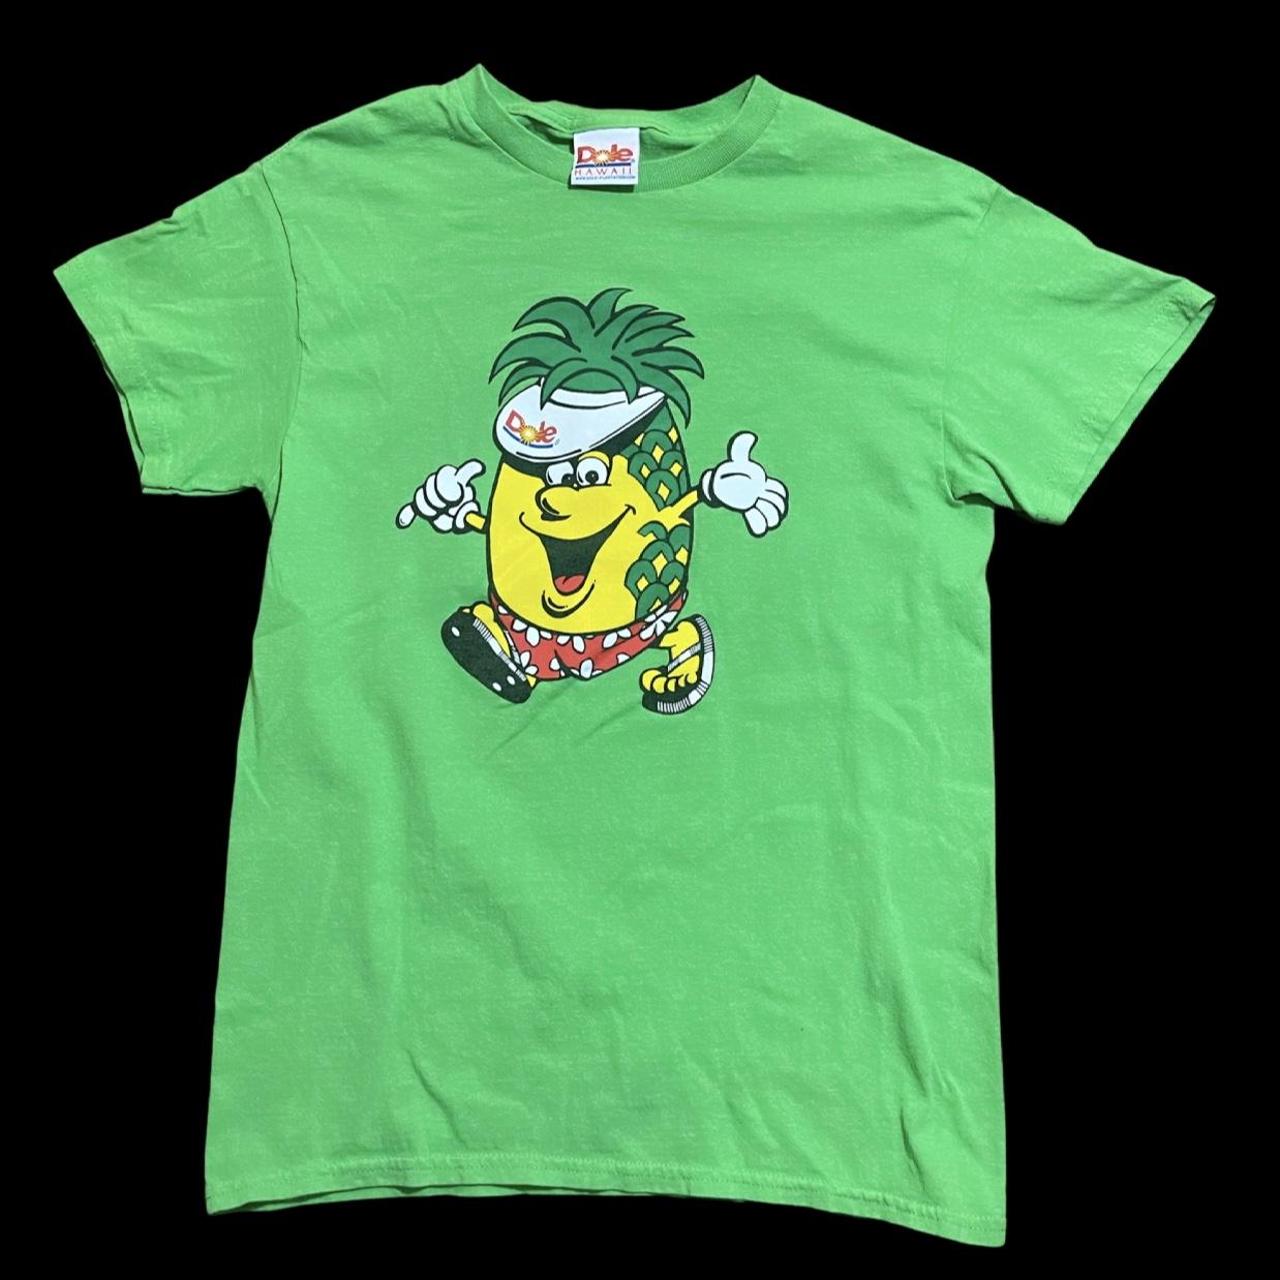 Adolescent Clothing Men's Green and Yellow T-shirt